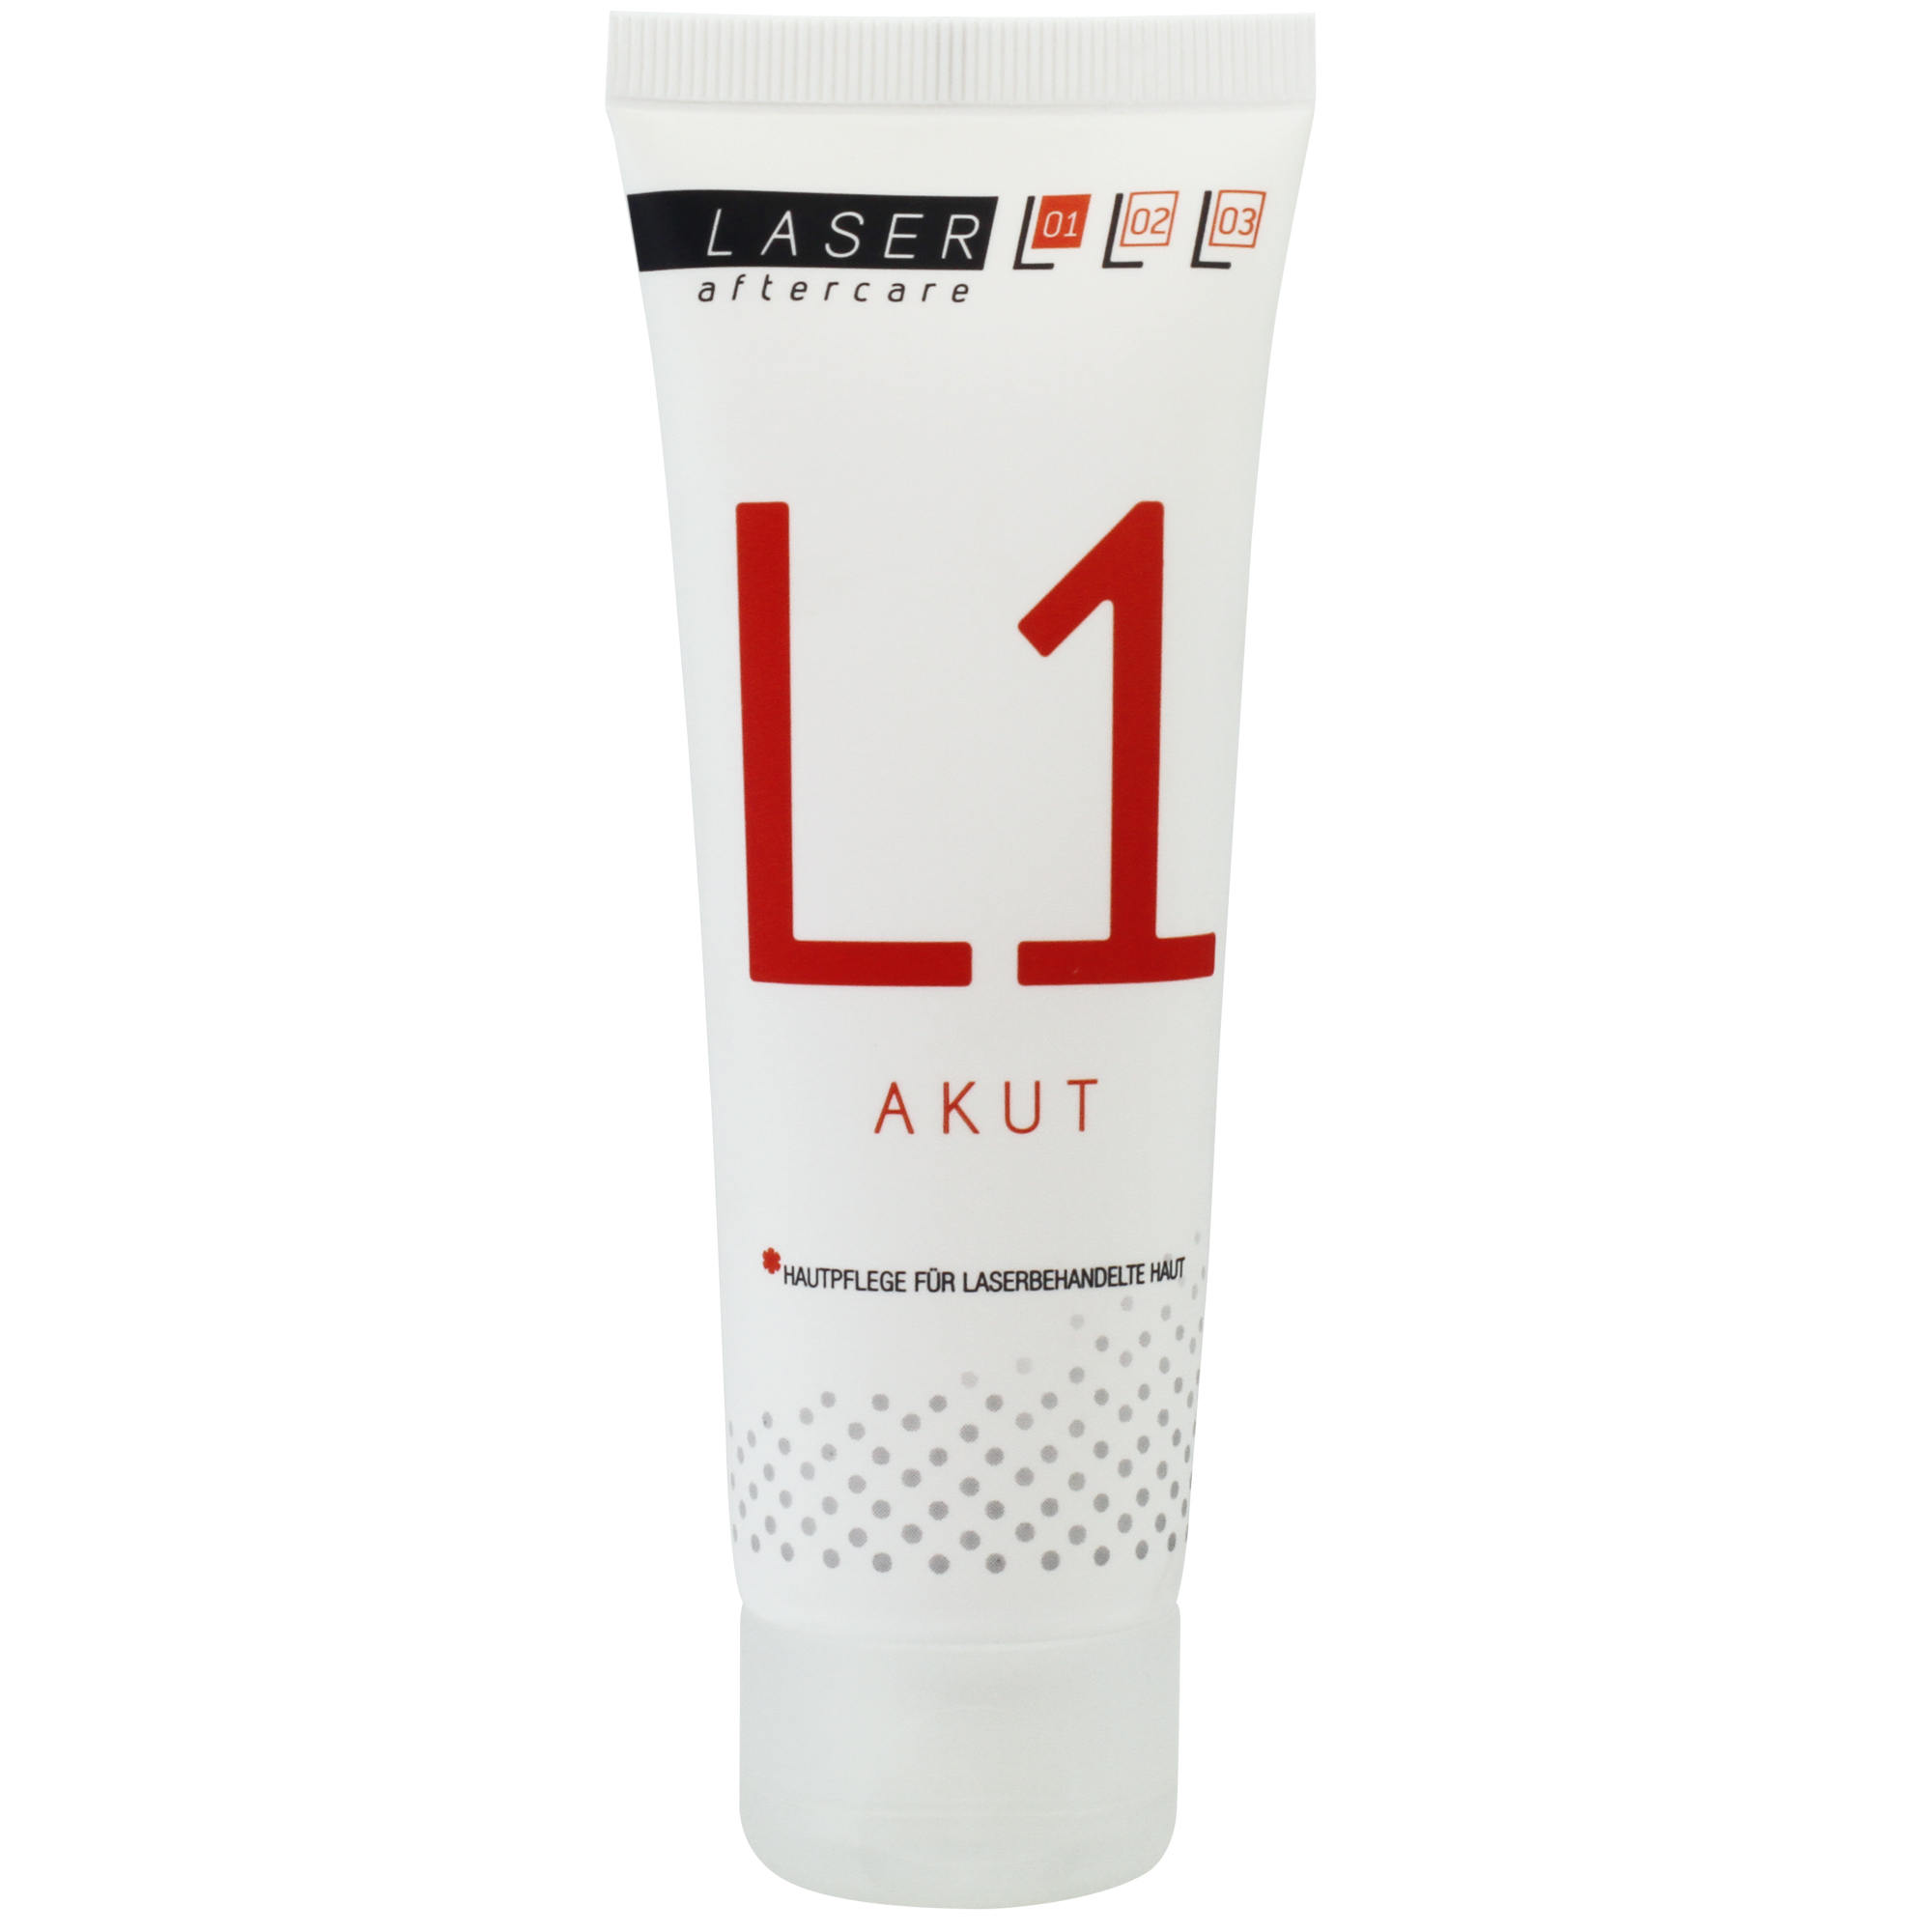 3181-TattooMed---laser-aftercare-L1-Akut-75-ml.jpg